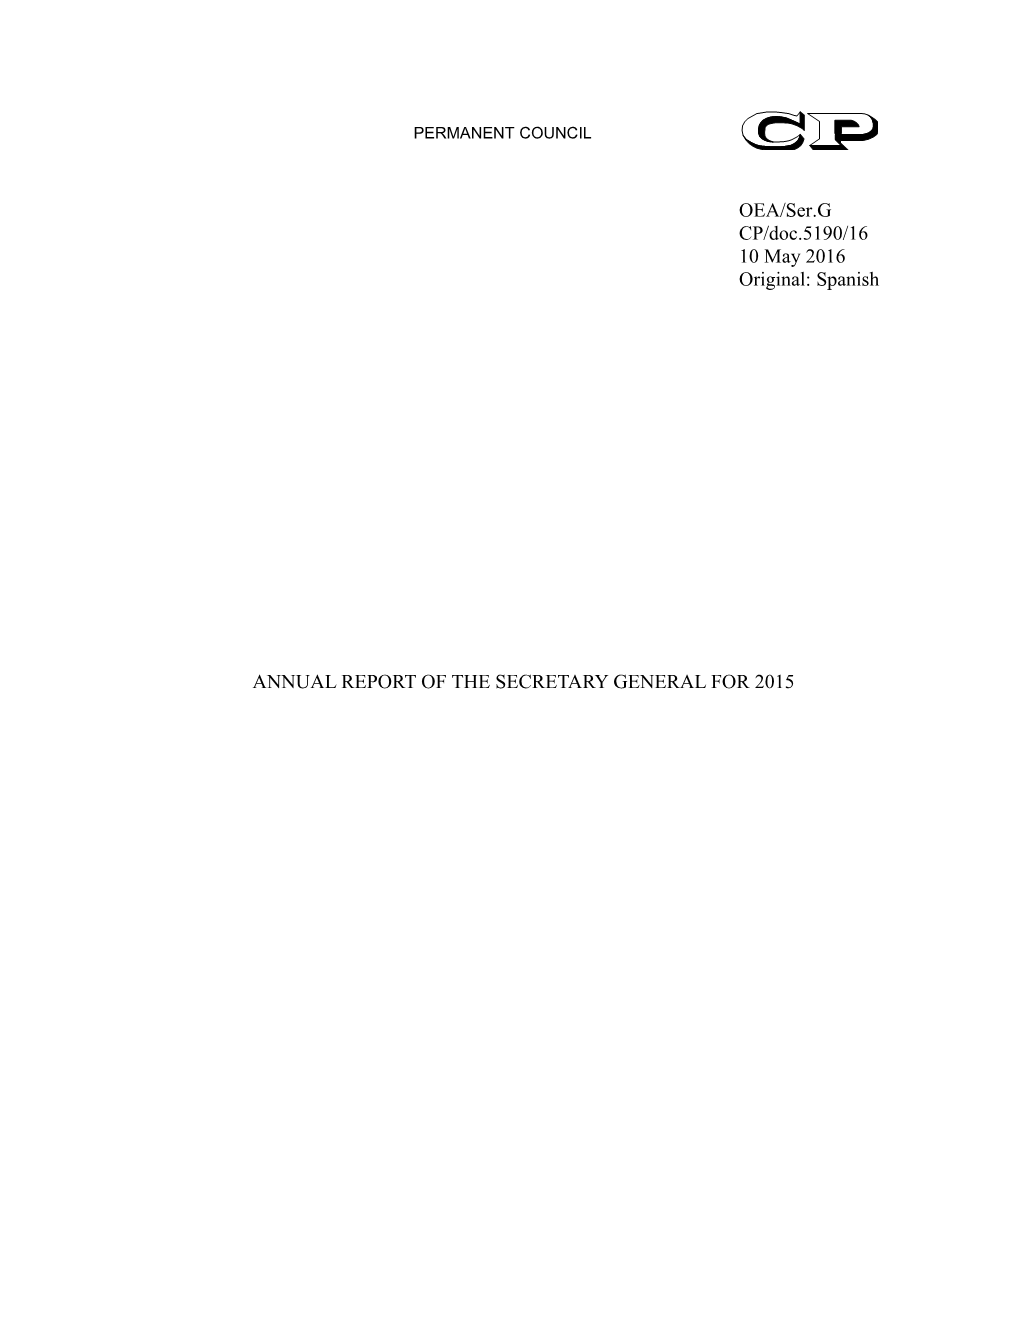 Annual Report of the Secretary General for 2015